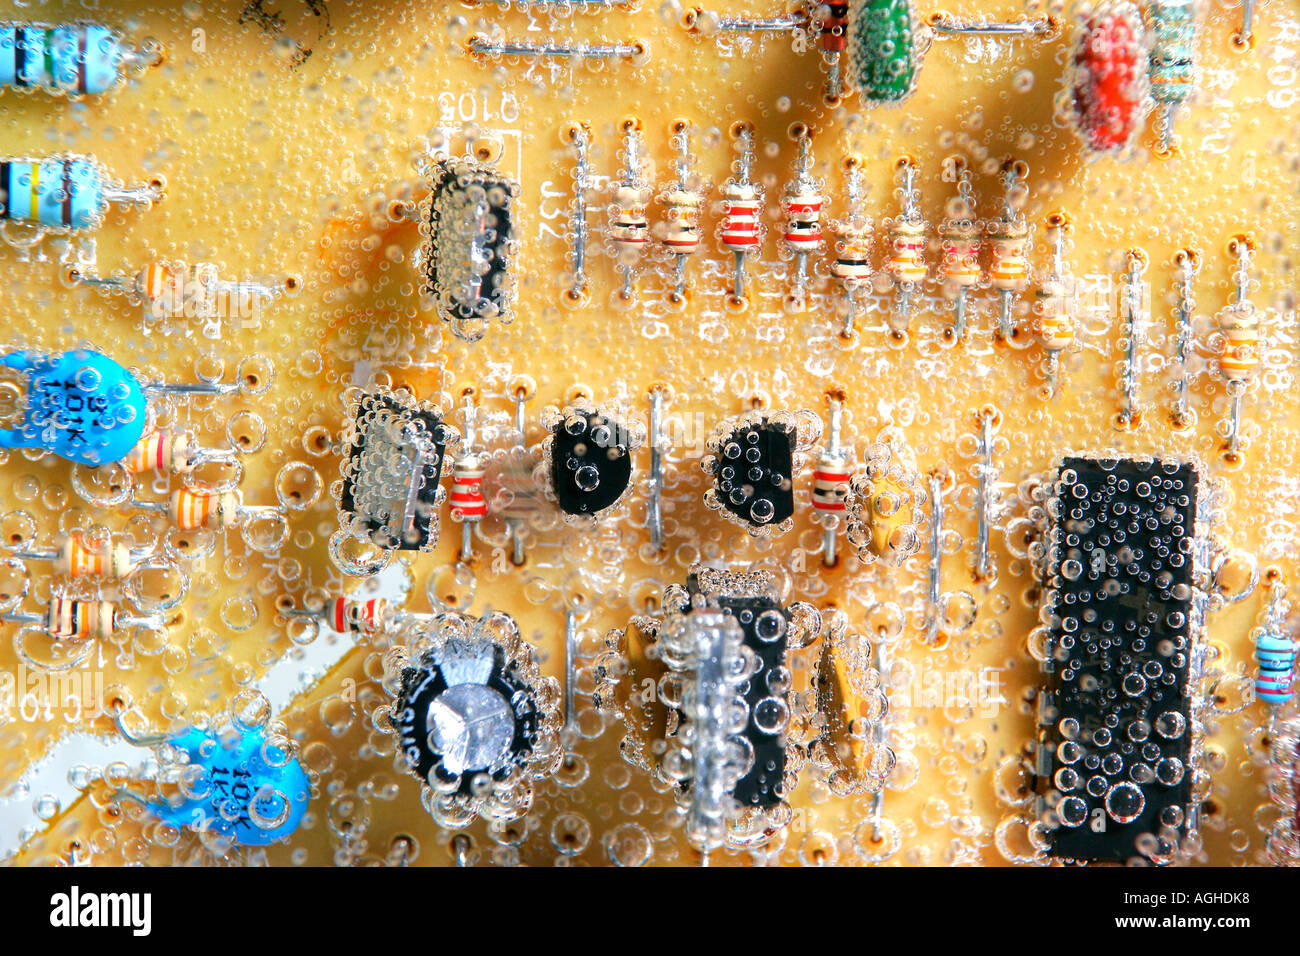 Circuit board full frame close up Stock Photo